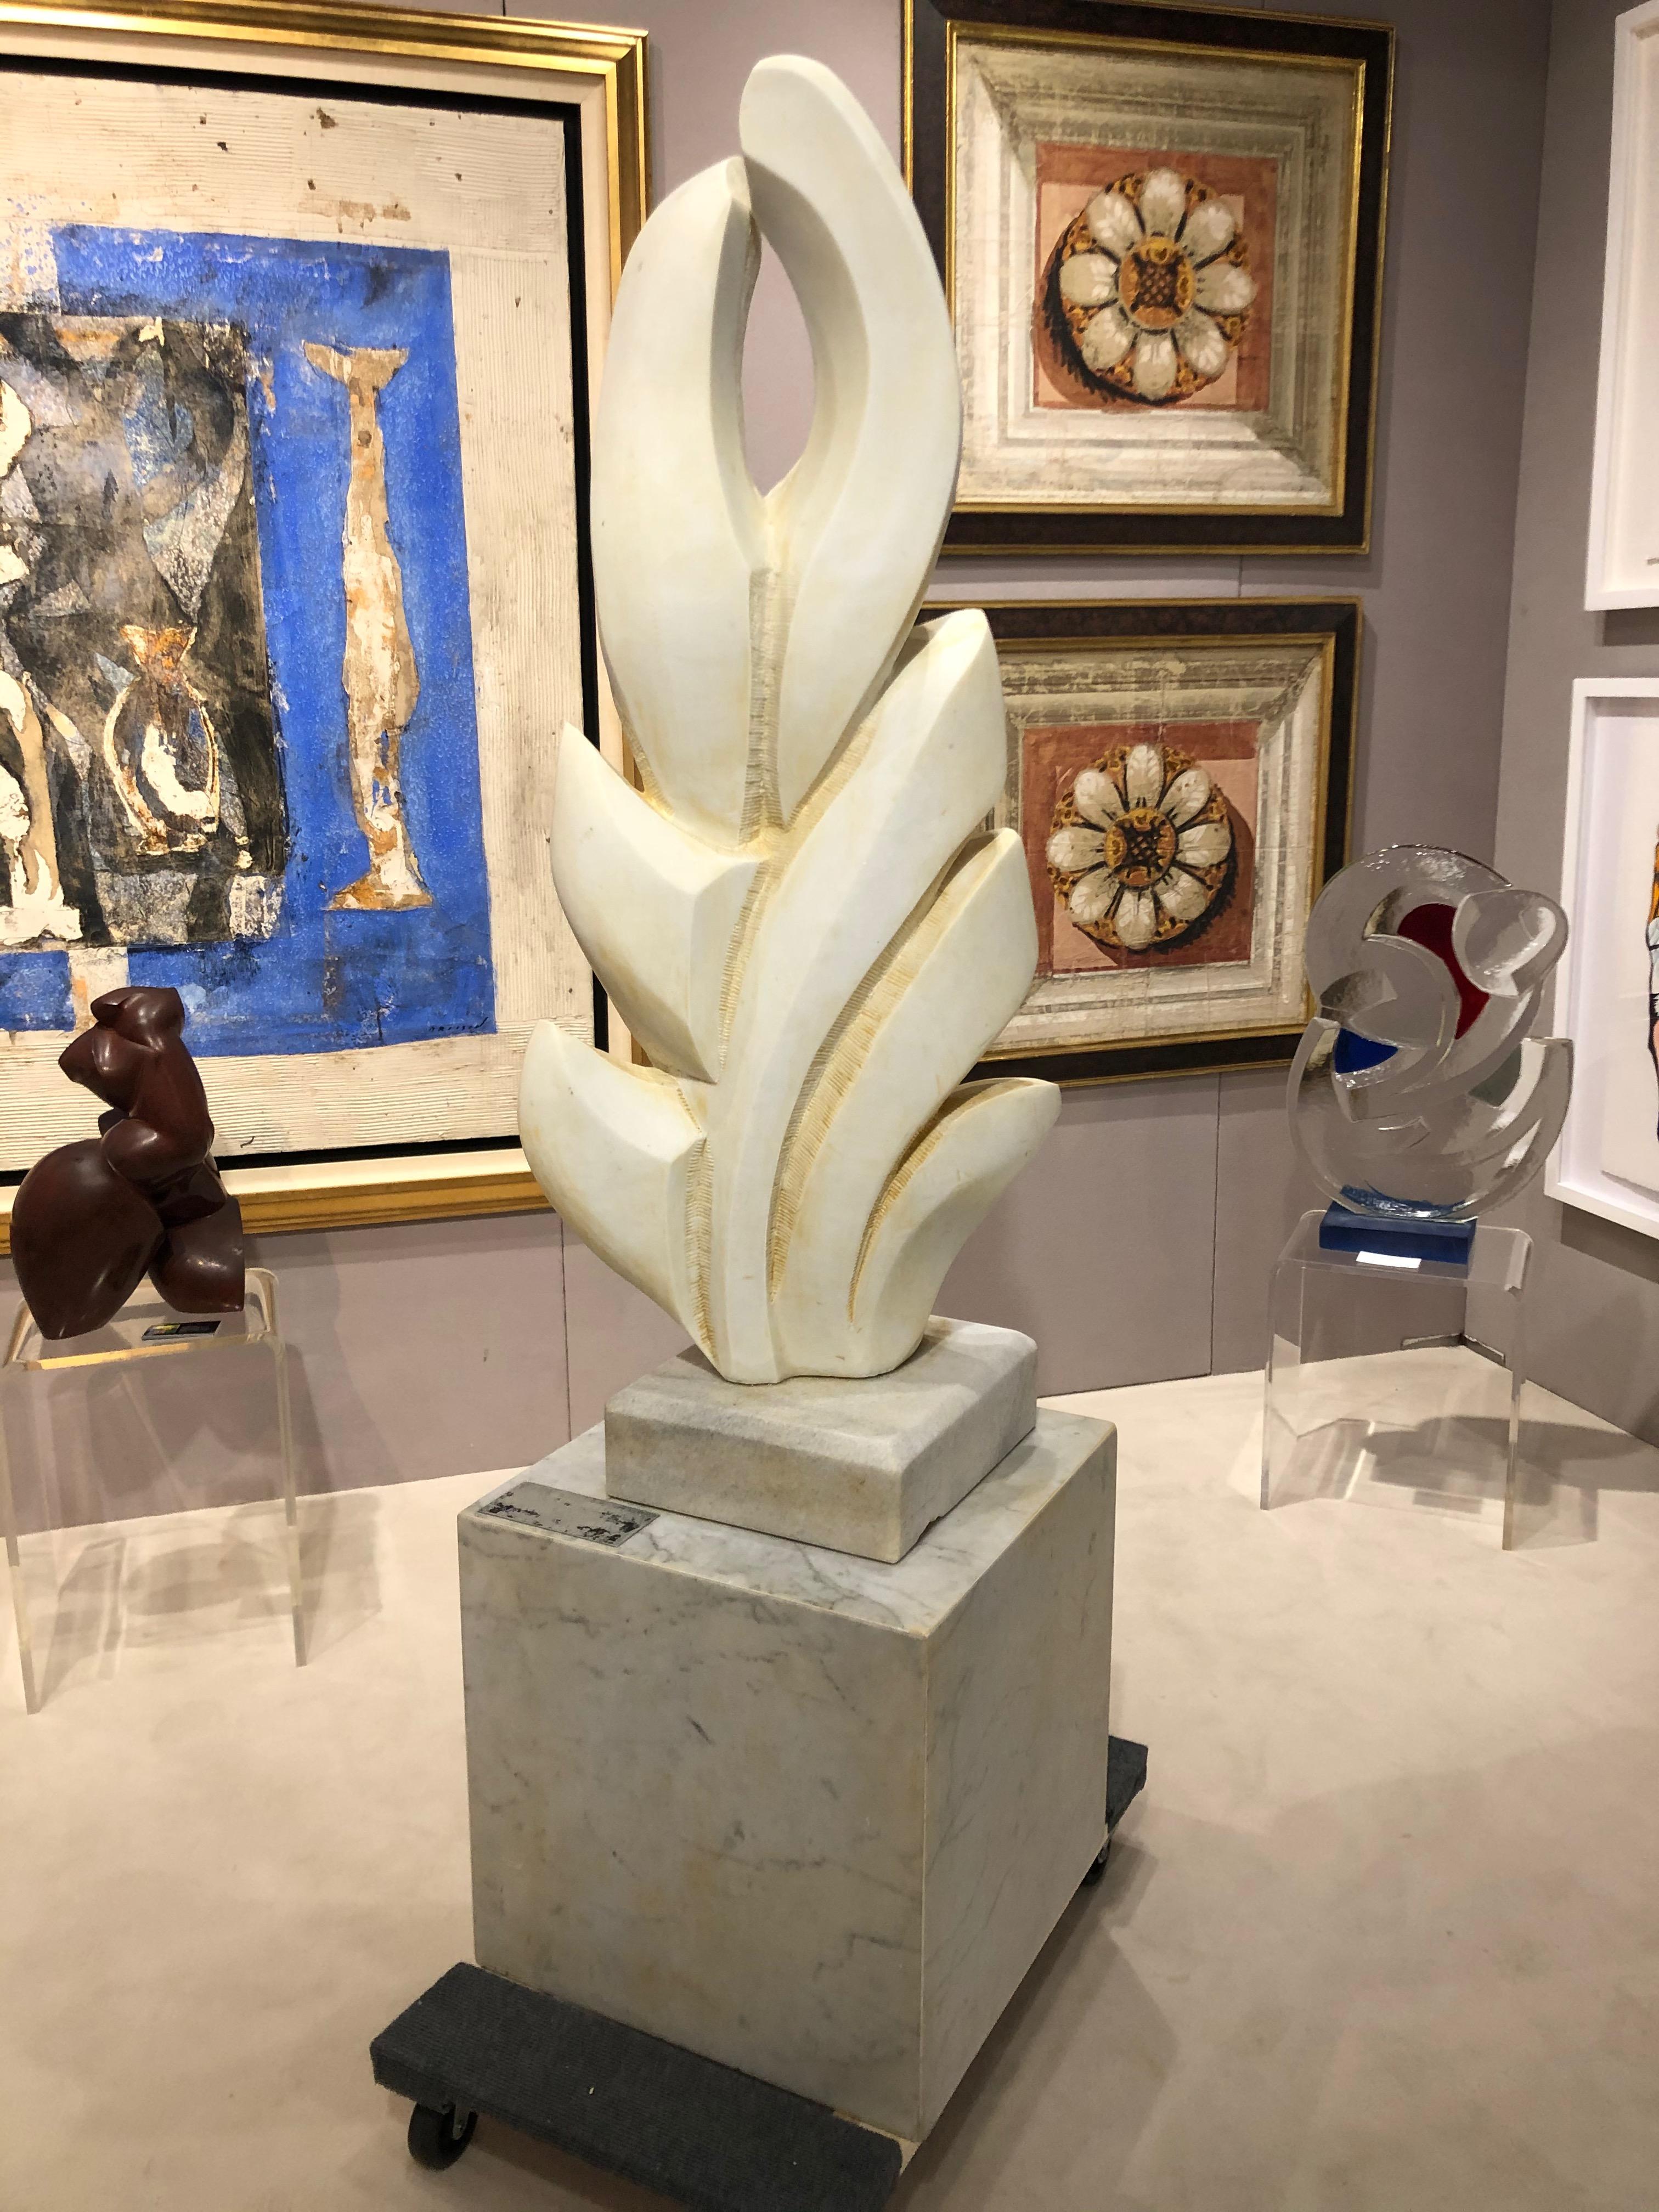 Suddenly It's Spring Carrara Marble Sculpture 1990 Pietra Santa Italy
Signed on the back, also plate with title, date on the marble base pedestal stunning sculpture for indoor or outdoor.
Sylvia Jaffe 1928-2011
 Floridian artist and sculptor, whose